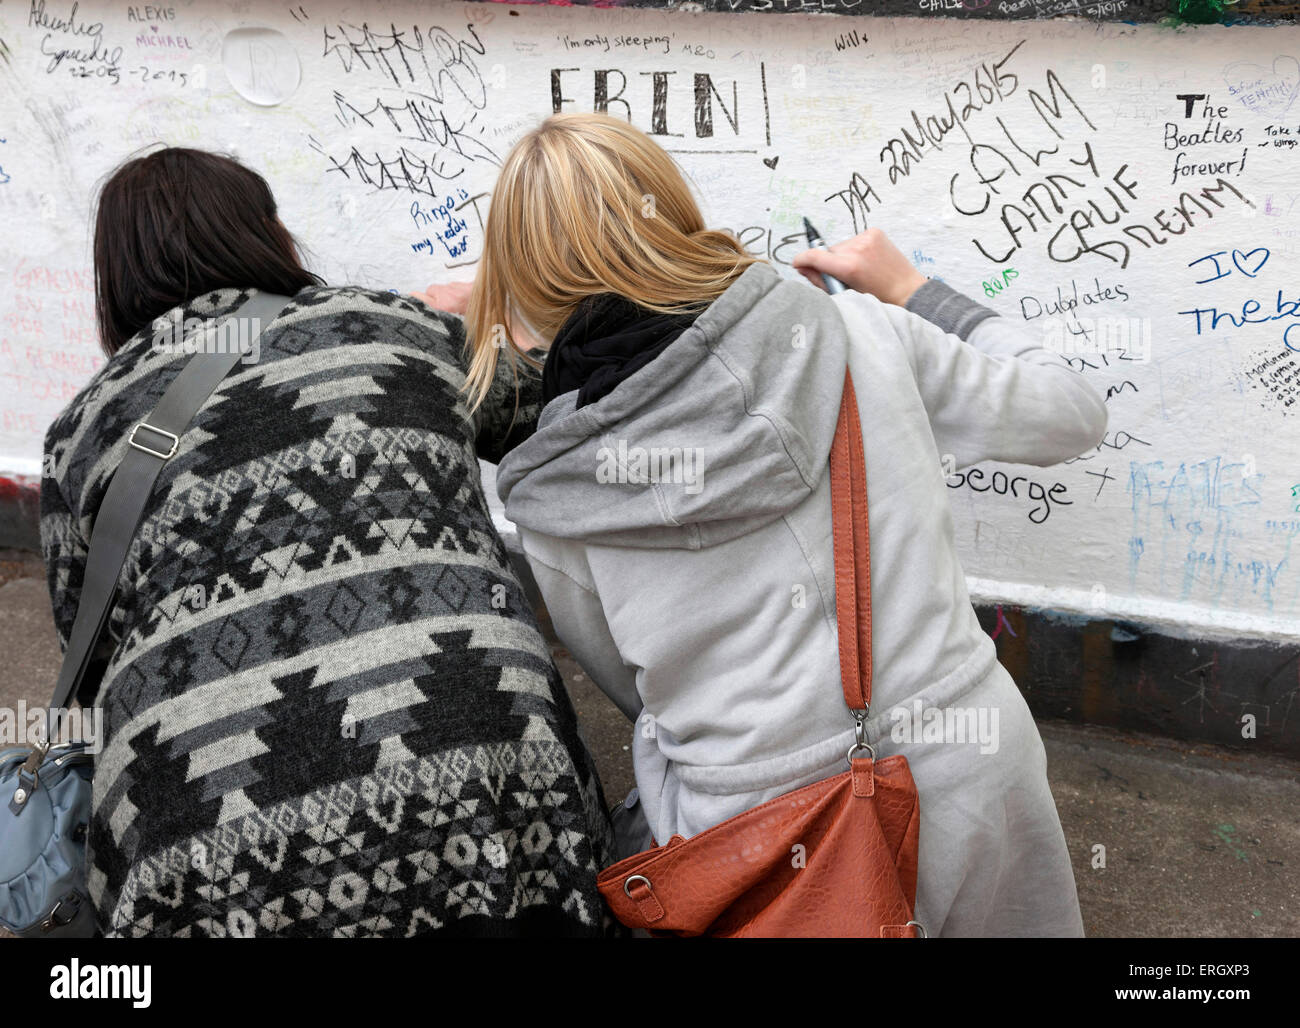 Beatles fans writing on wall at Abbey Road studios Stock Photo